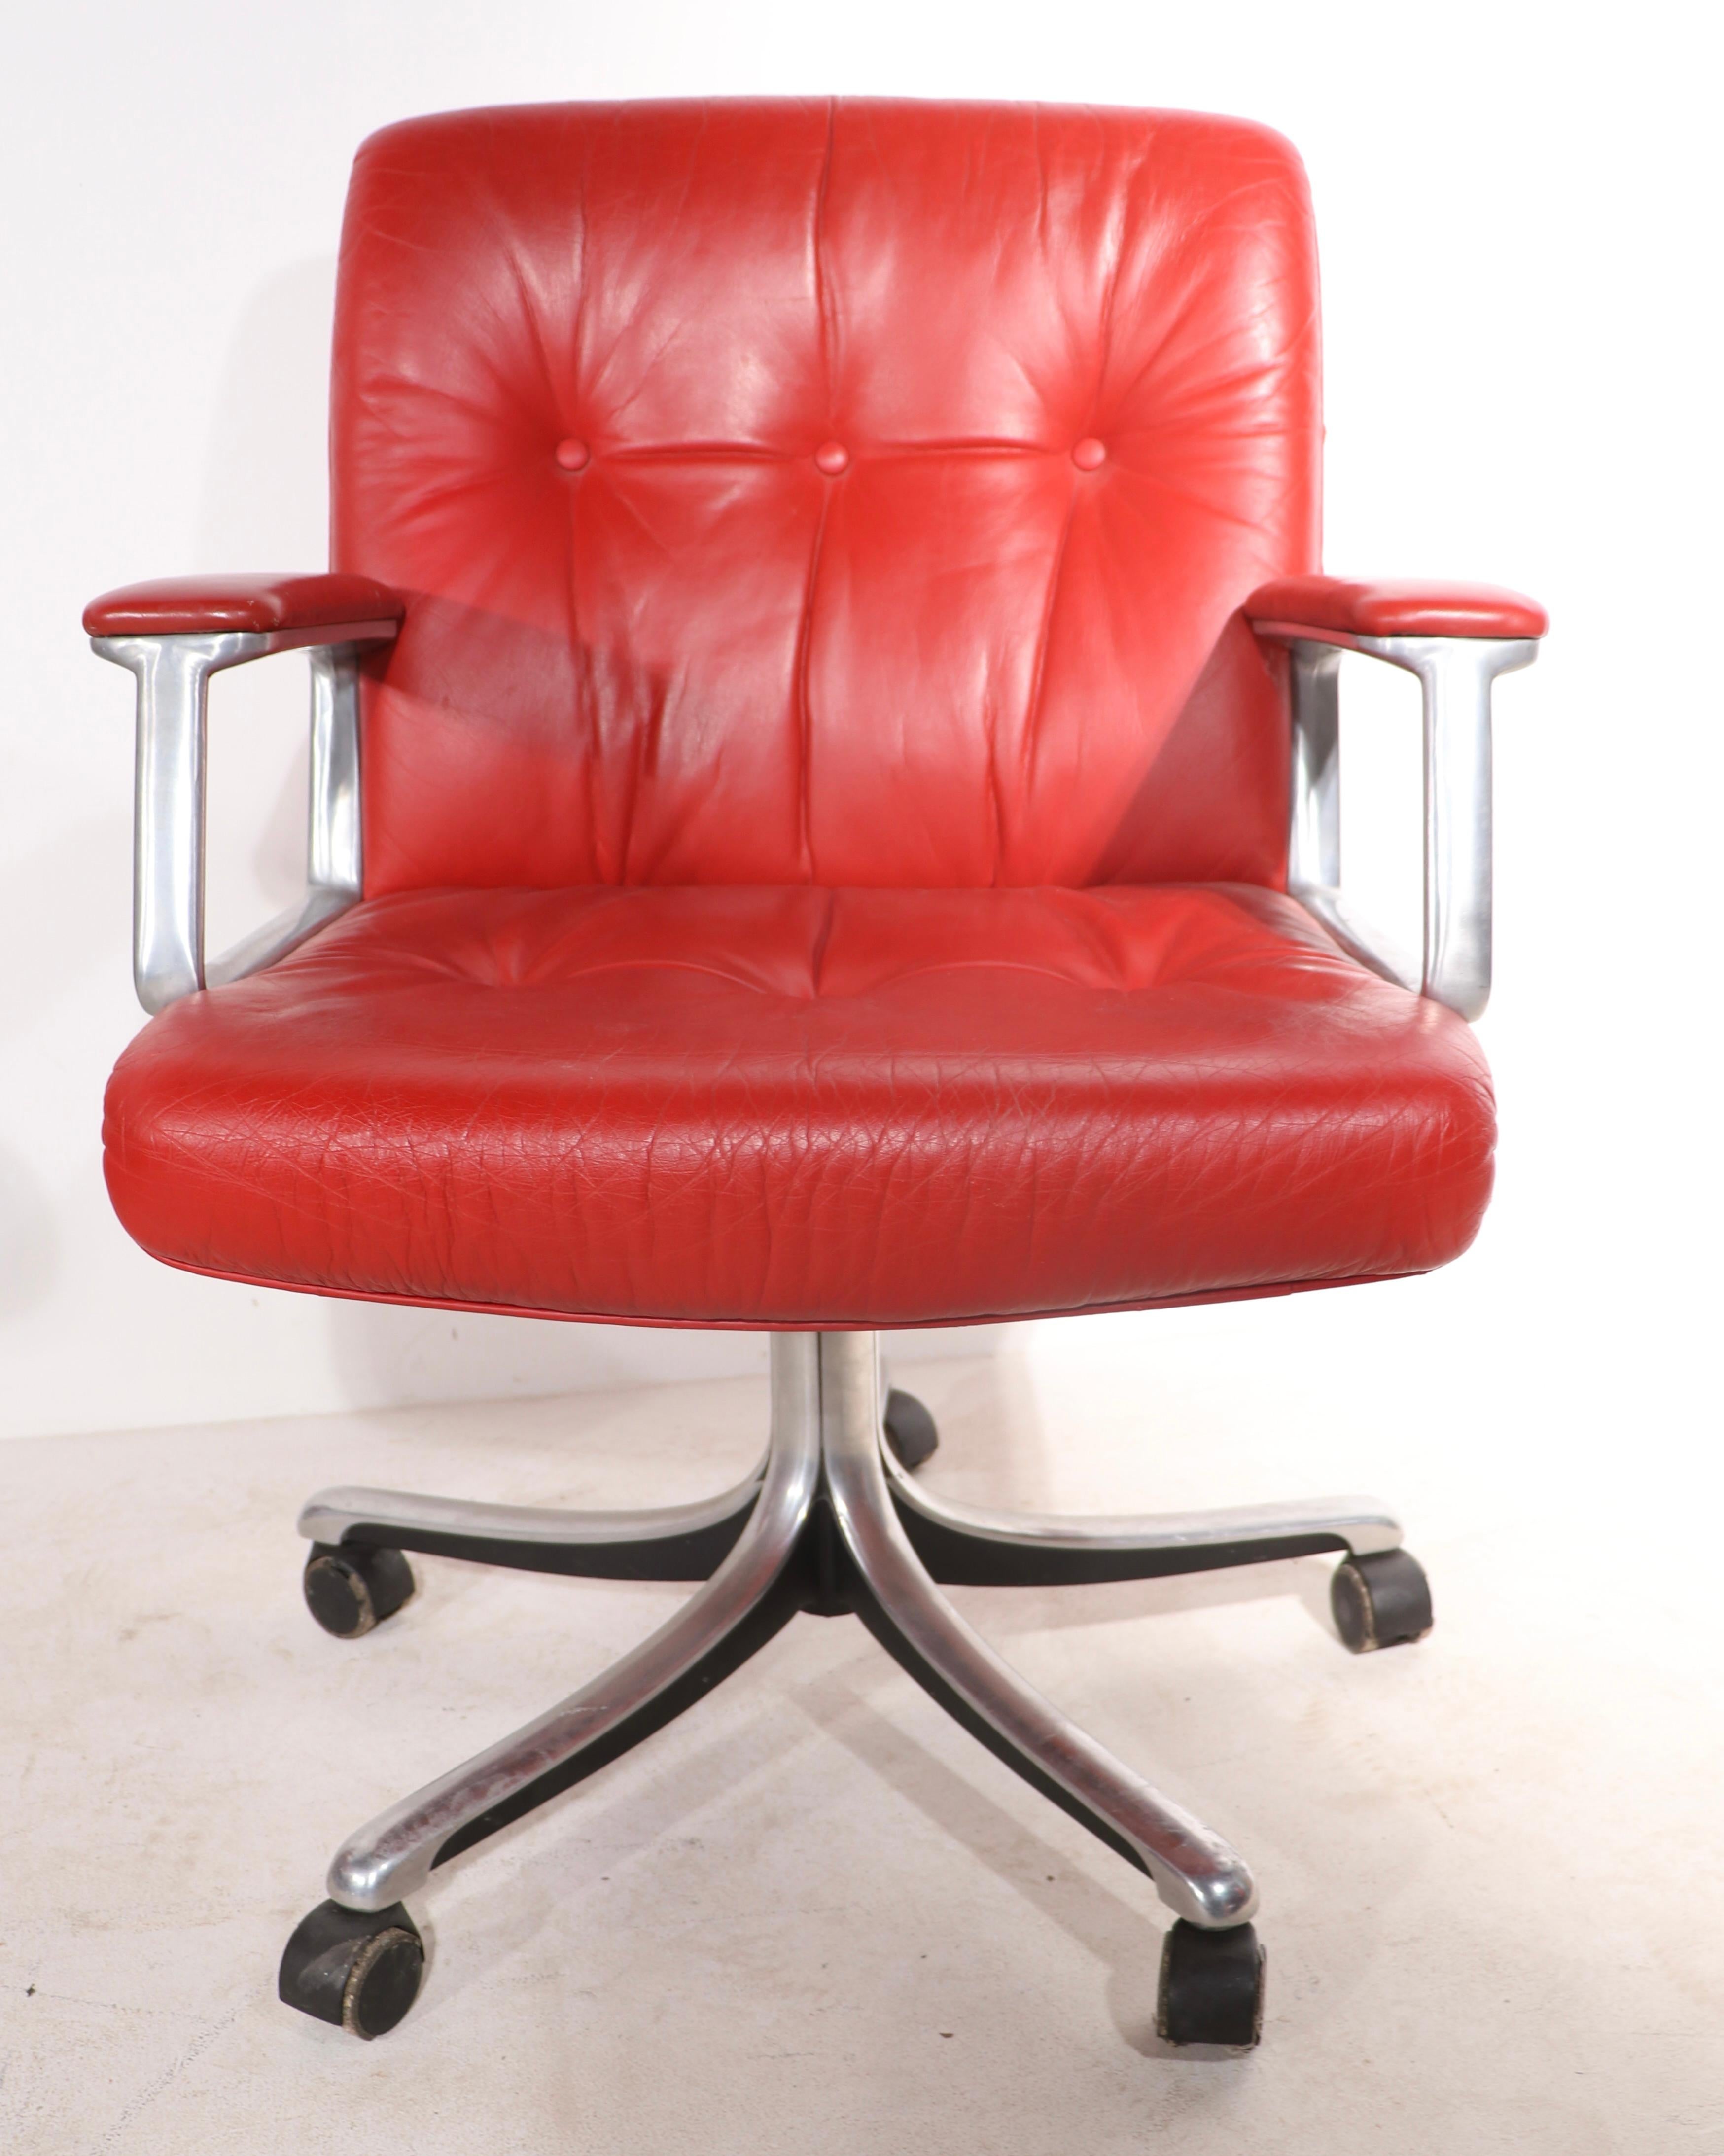 8 P128 Borsani Swivel Desk Chairs in Lipstick Red Leather Upholstery  7